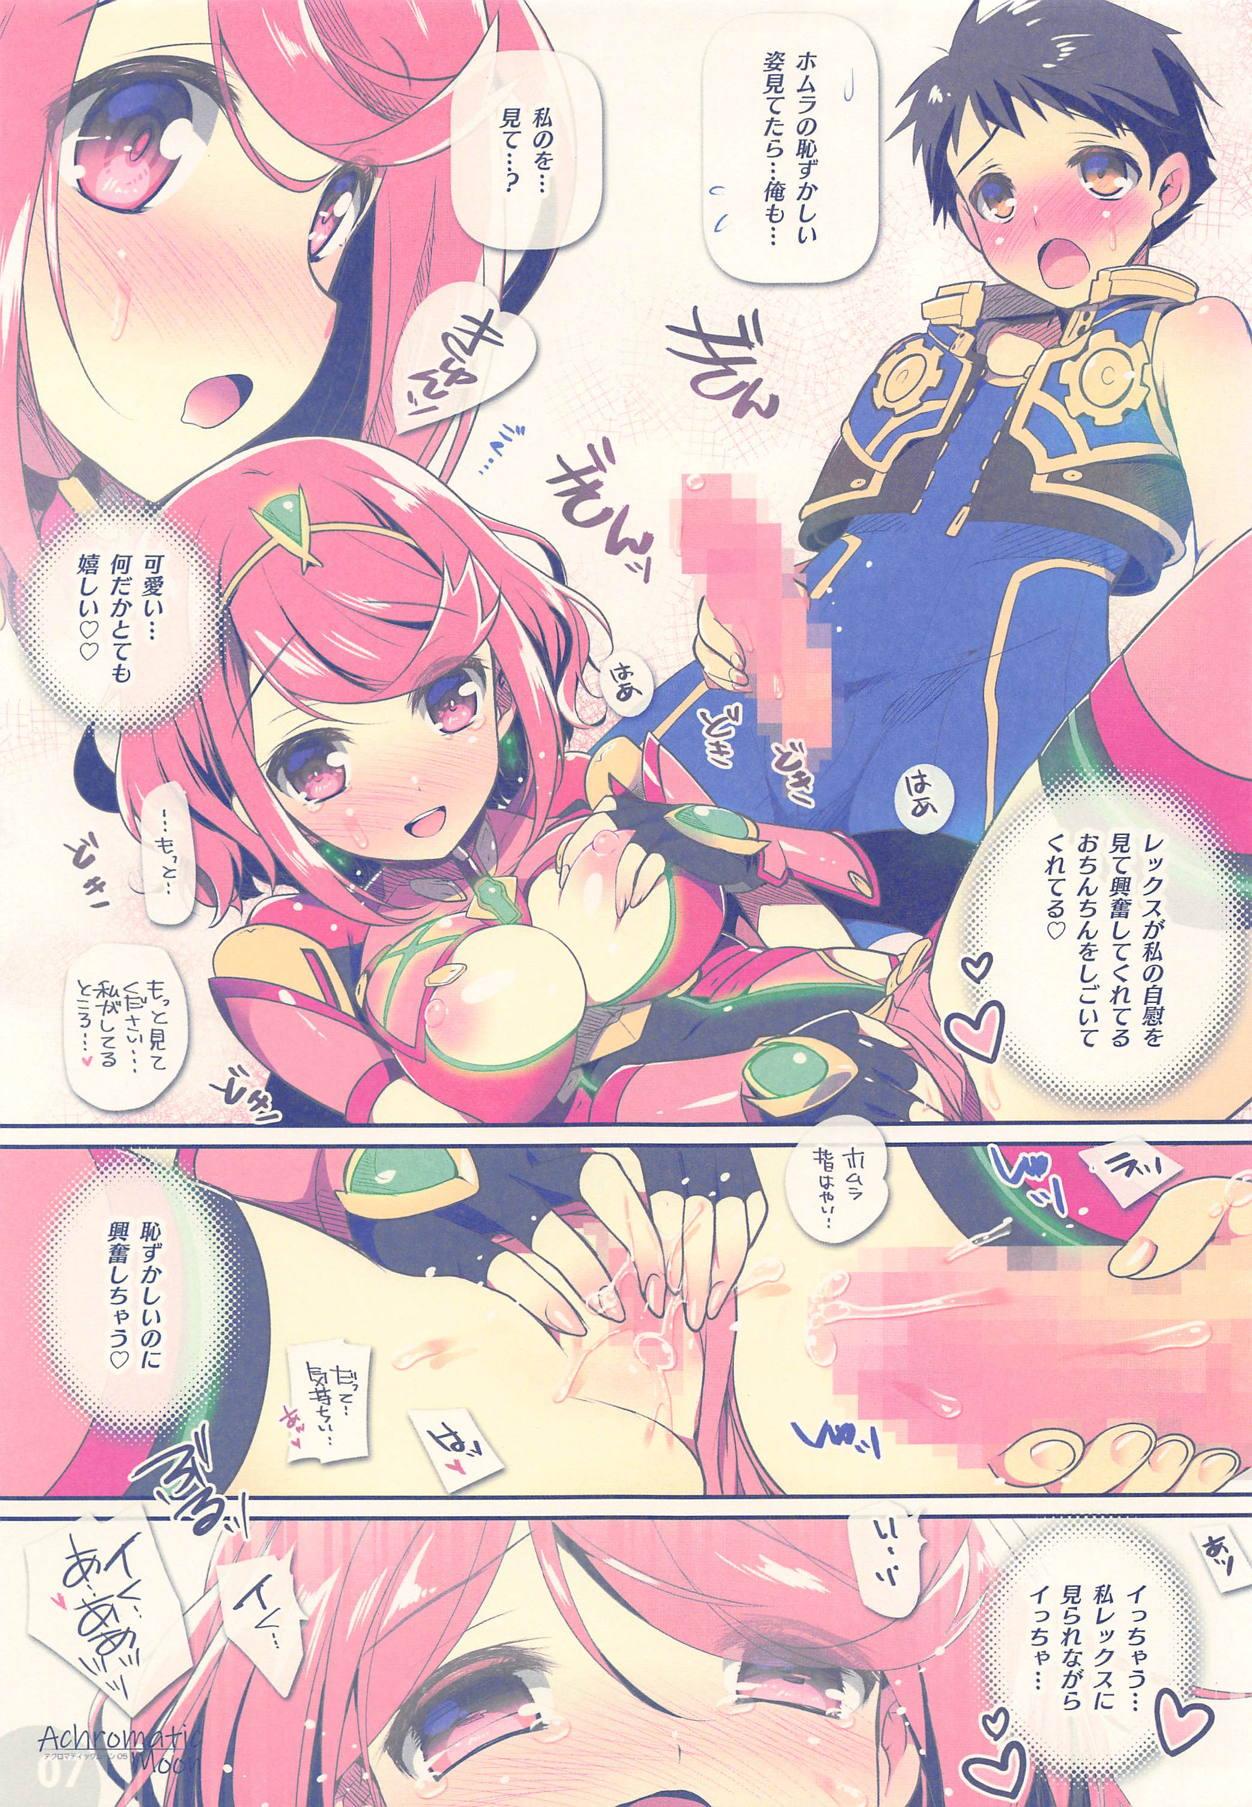 Perfect Body Porn Achromatic Moon 05 - Xenoblade chronicles 2 Shower - Page 6